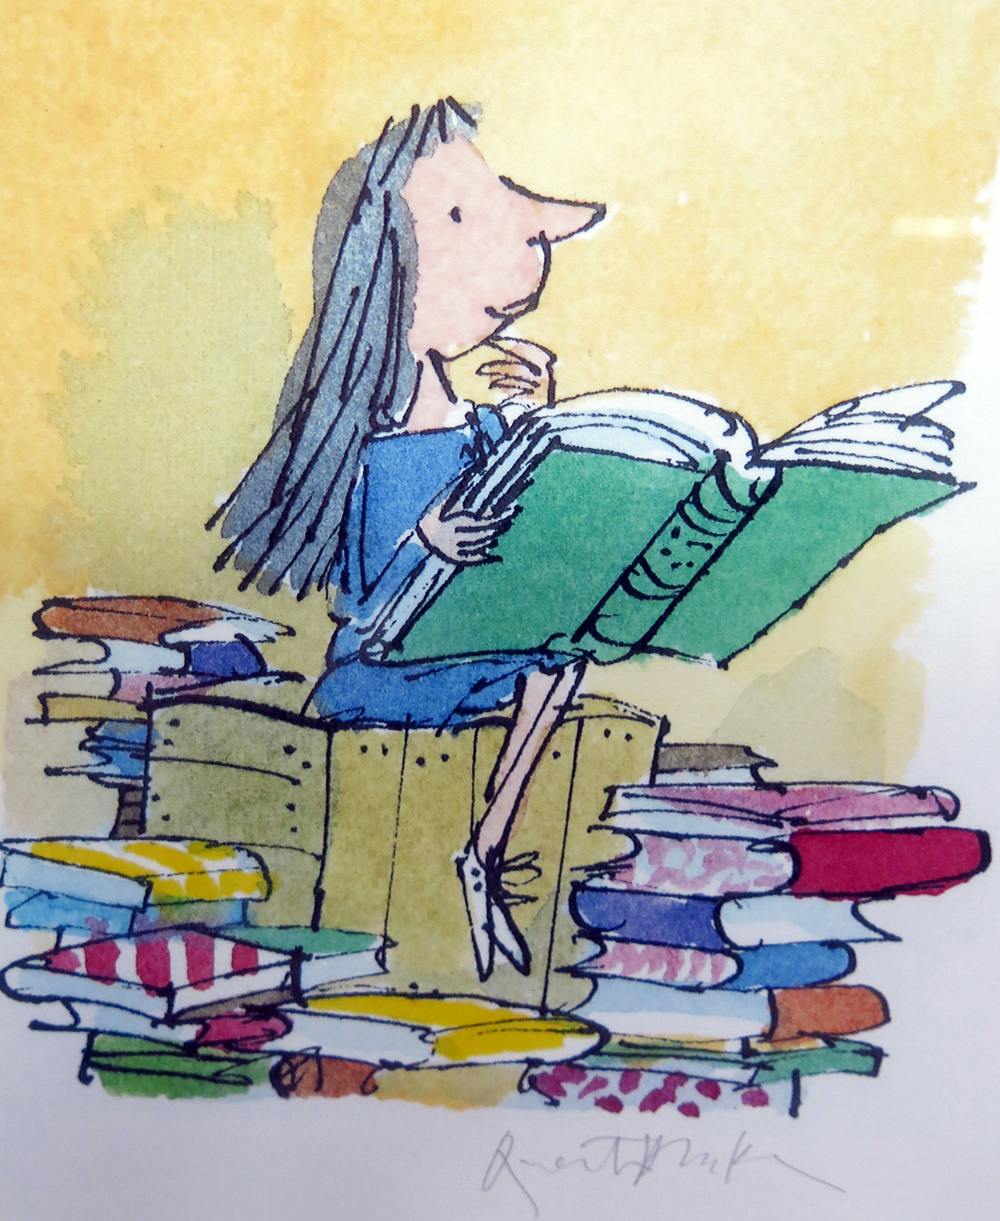 A drawing by Quentin Blake from Fonda Snyder's private collection. Courtesy of Fonda Snyder